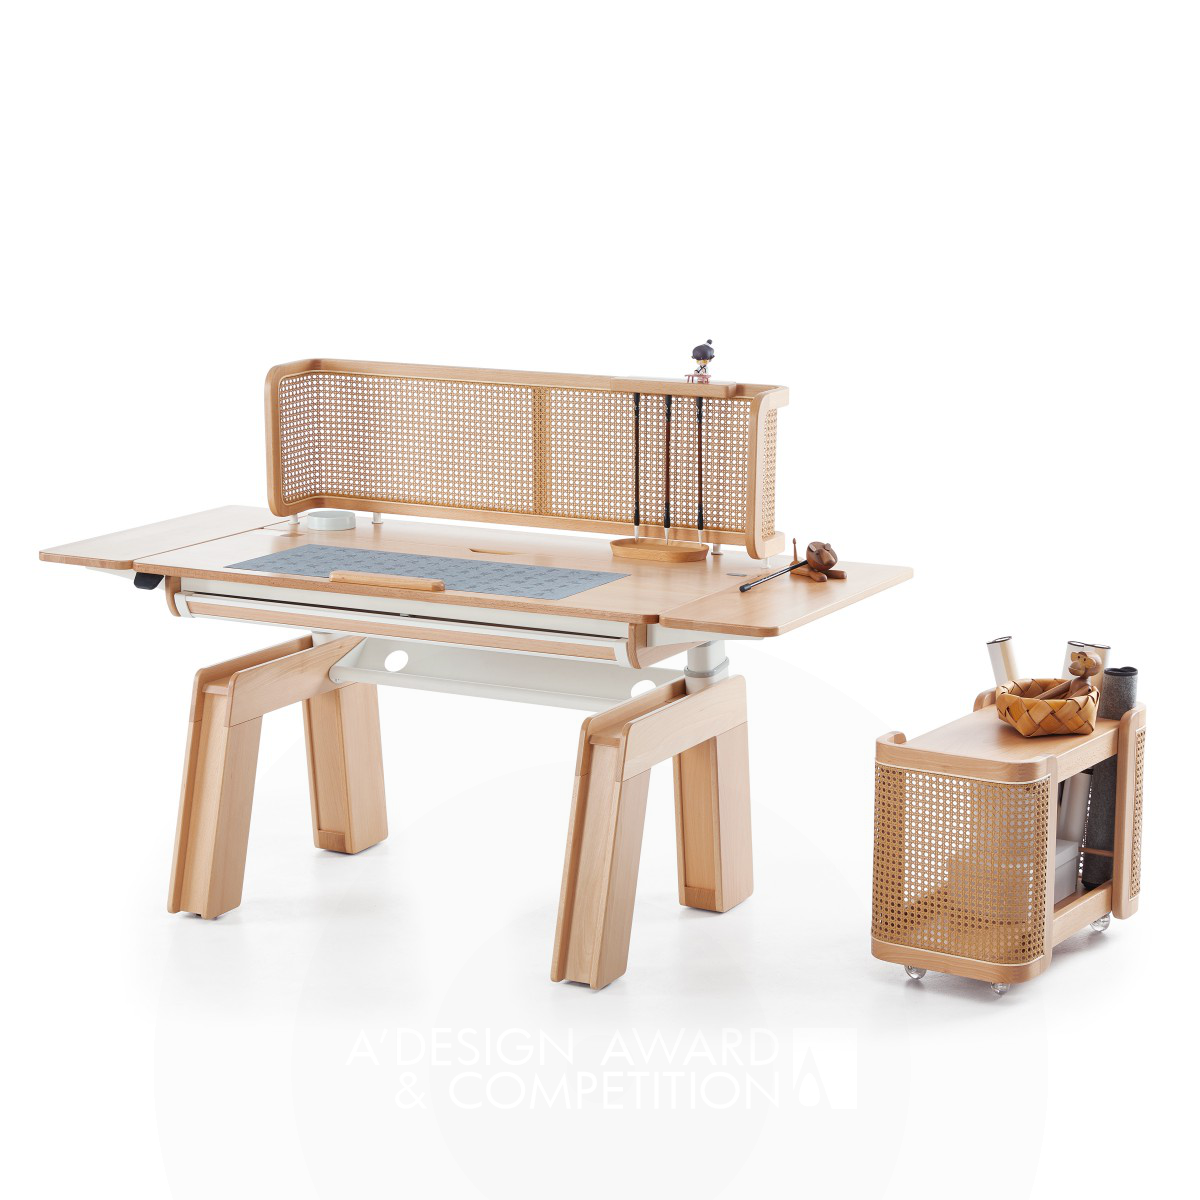 PanYan Fei wins Silver at the prestigious A' Furniture Design Award with Calligraphy Study Desk.